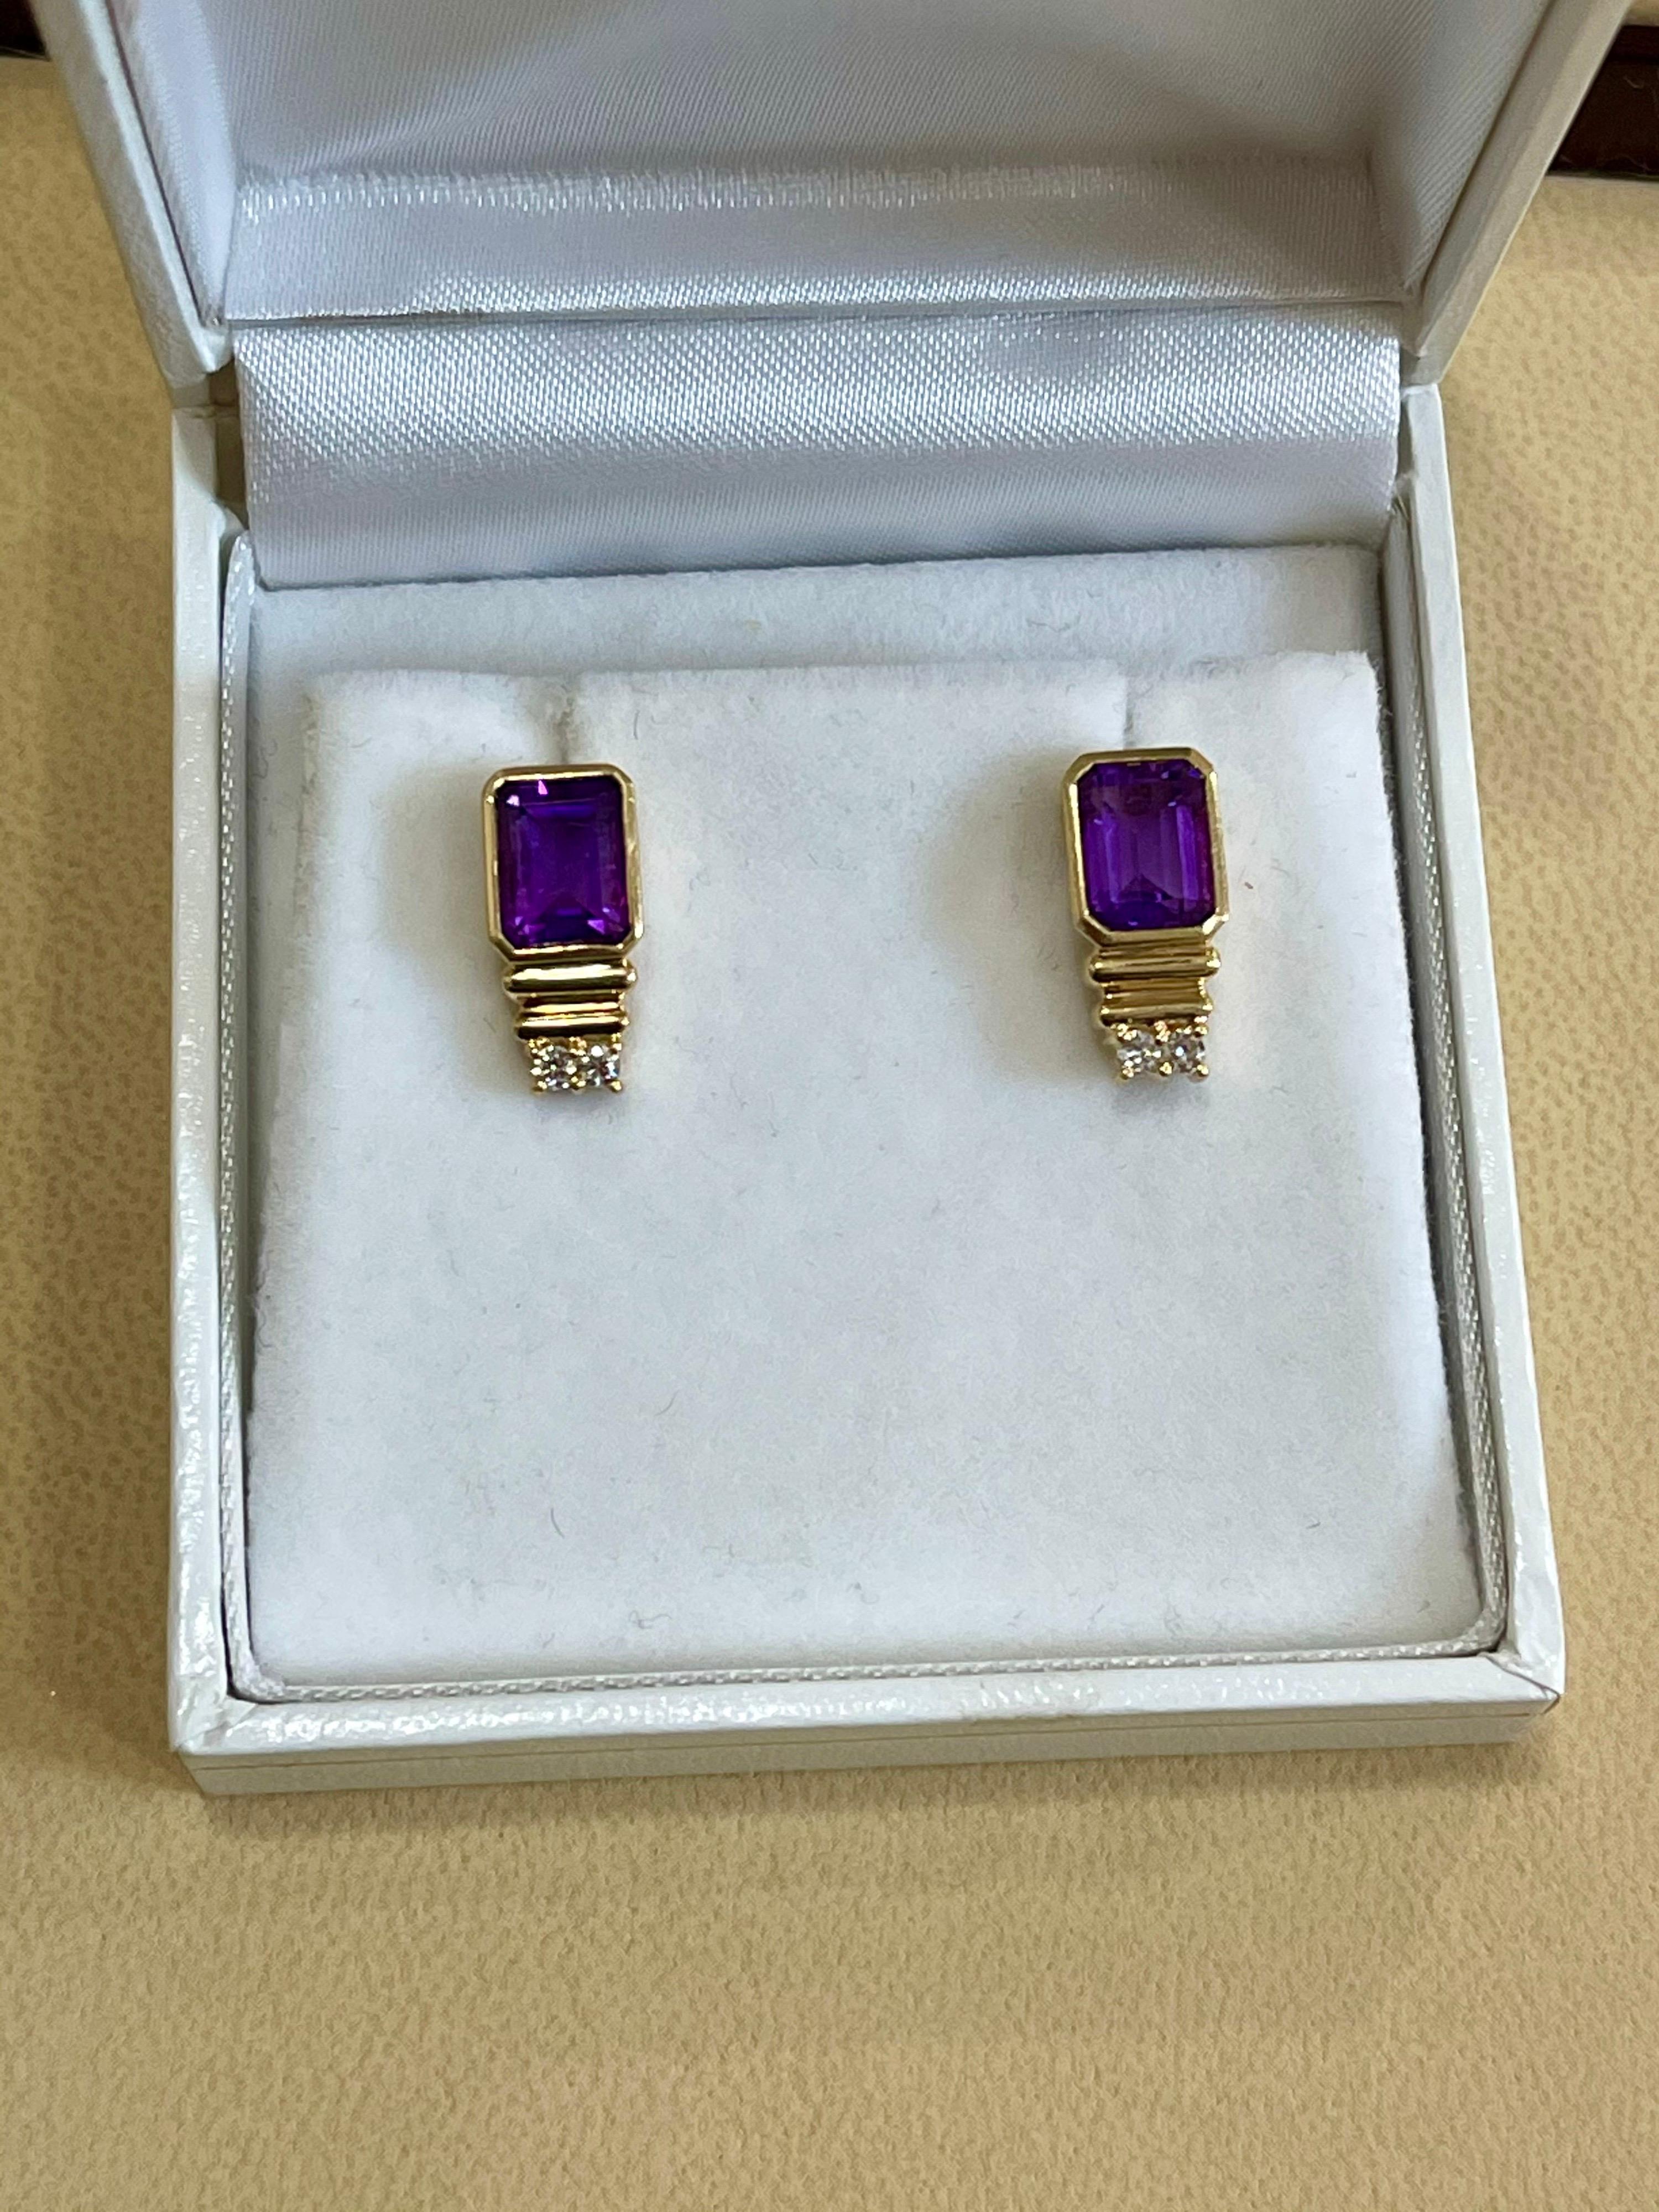 3 Carat Emerald cut  Amethyst and Diamond 14 Karat Yellow Gold Earrings, Stud Post Earring
Beautiful pair of earrings  finely crafted in  14 Karat  solid Yellow gold.
9 X 7 emerald cut stone
Very desirable color and quality.
perfect pair made in 14